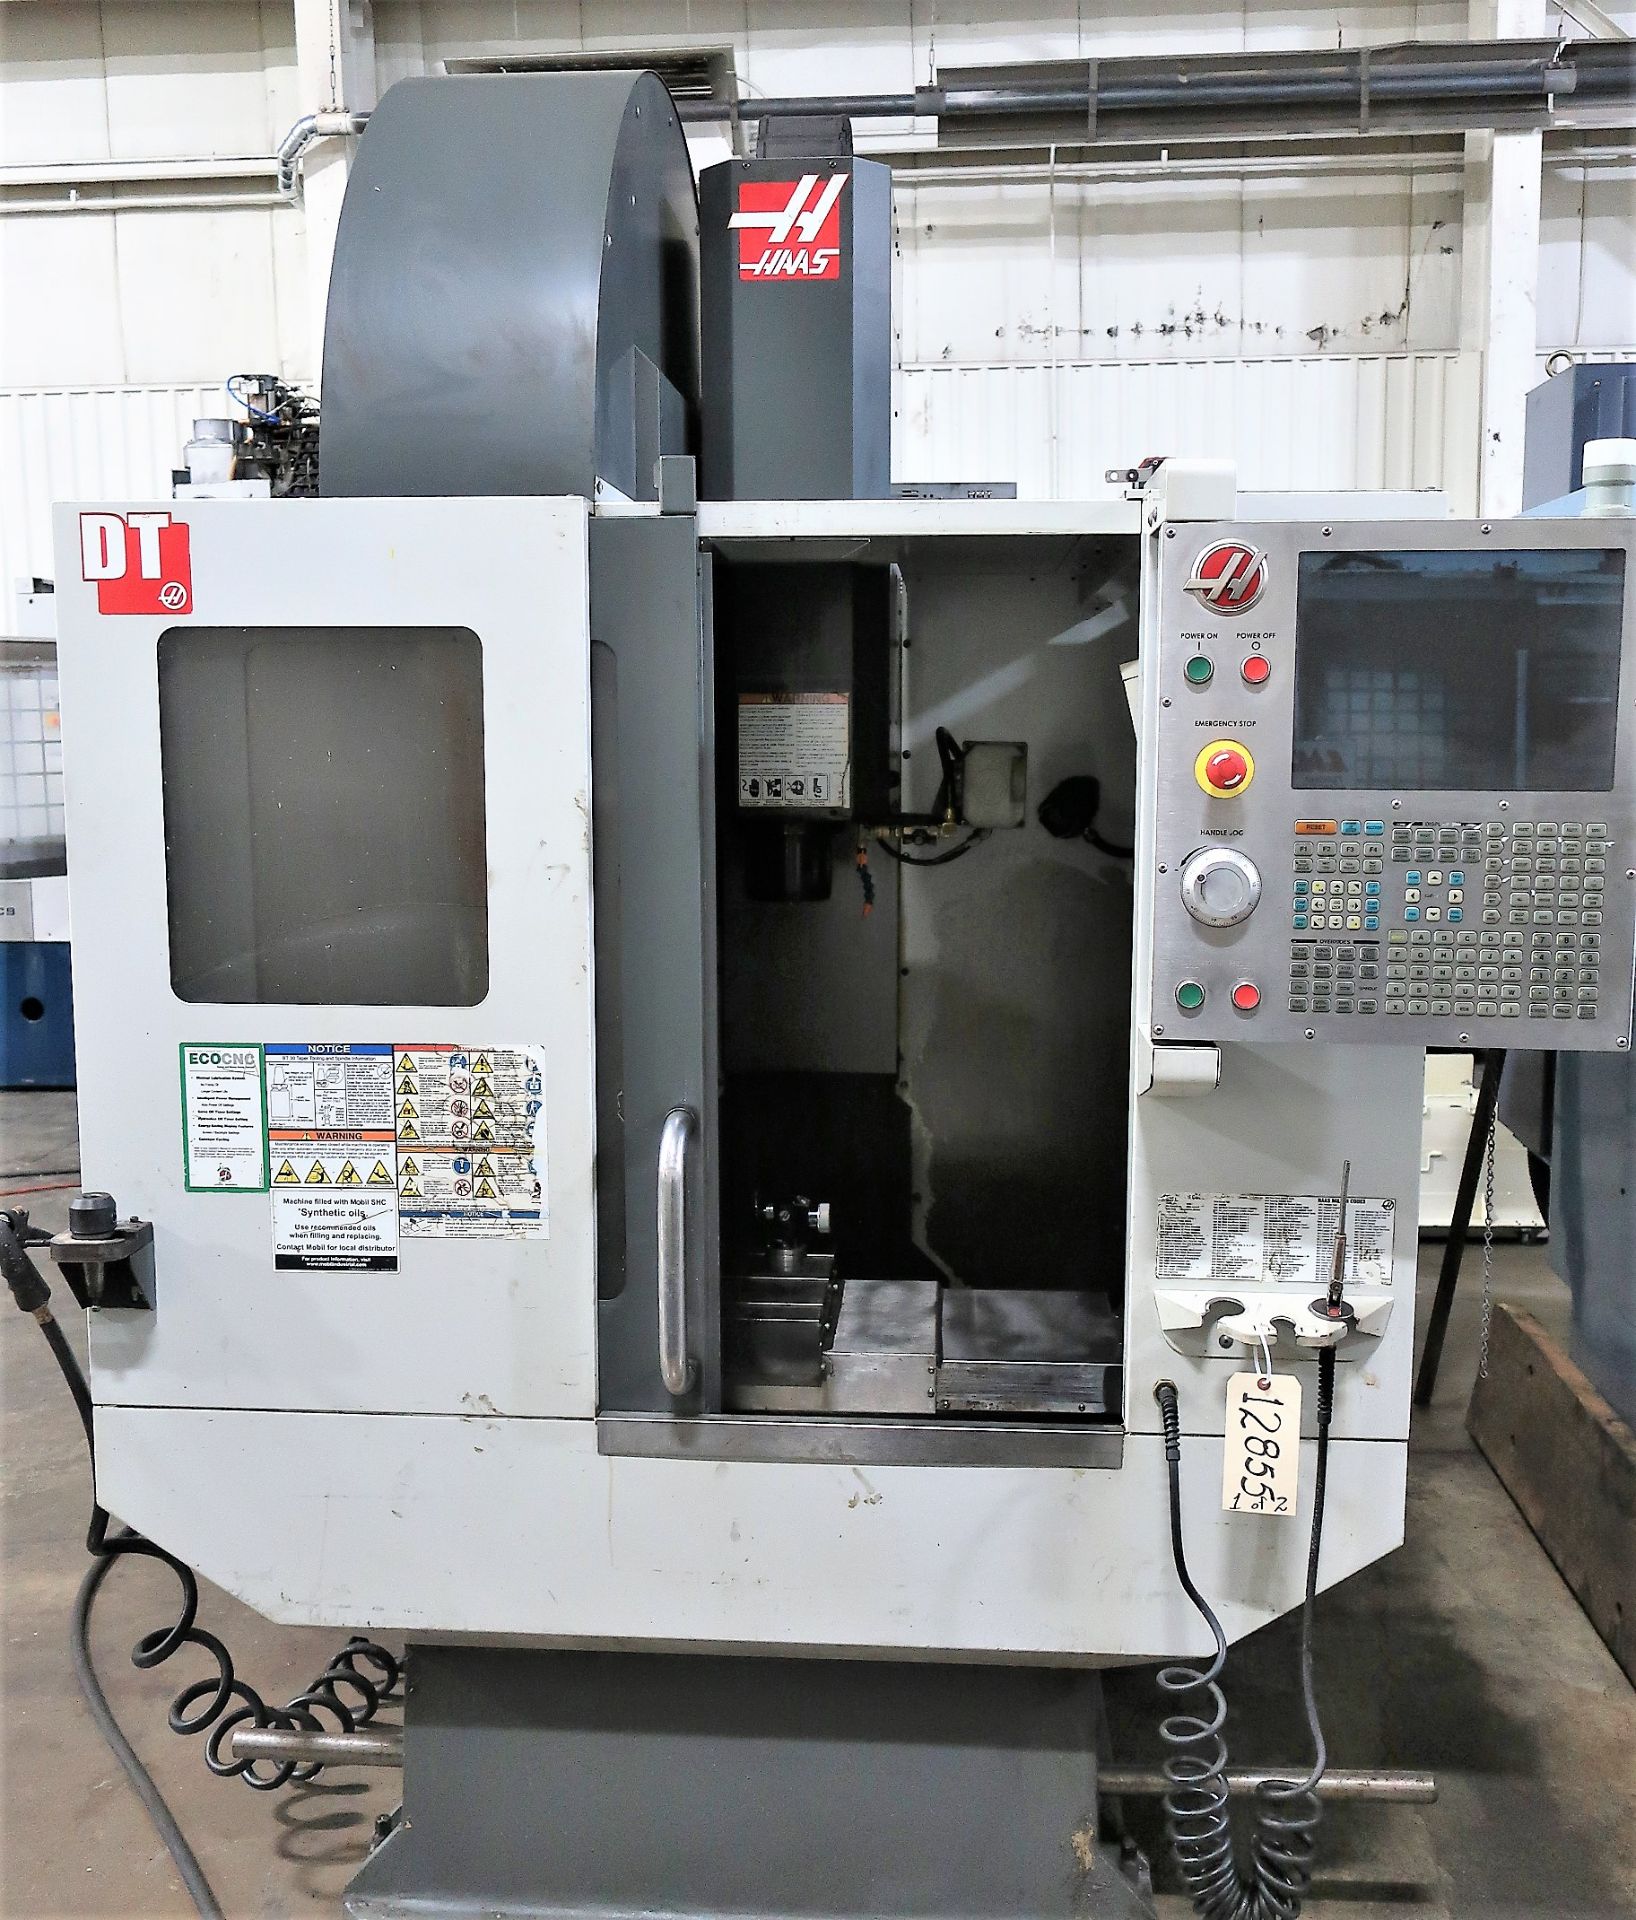 HAAS DT-1 4-AXIS READY CNC DRILL/TAP VERTICAL MACHINING CENTER, S/N 1089527, NEW 2011